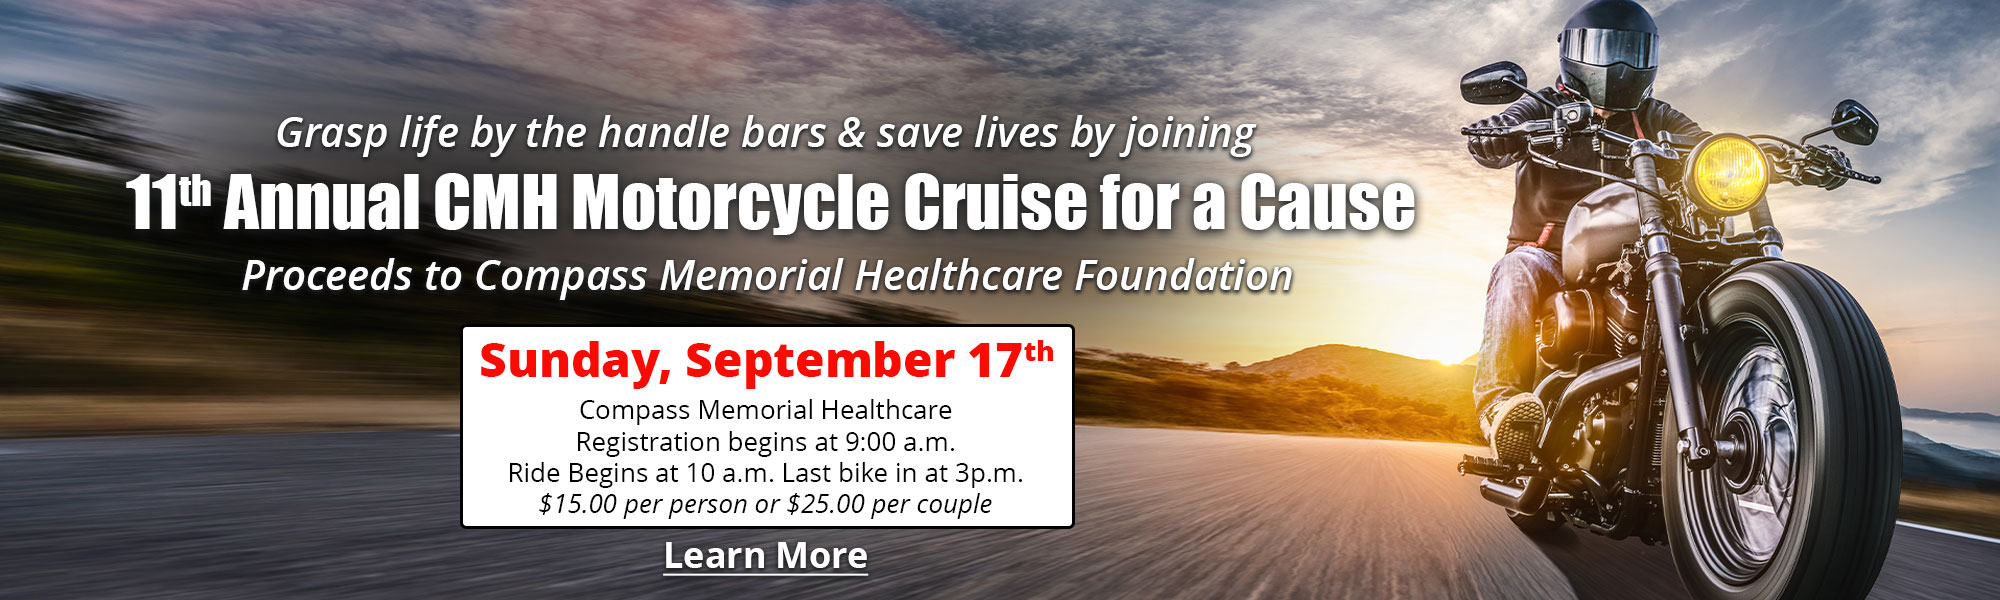 Grasp life by the handle bars & save lives by joining

11th Annual CMH Motorcycle Cruise for a Cause

Proceeds to Compass Memorial Healthcare Foundation

Sunday, September 17th

Compass Memorial Healthcare
Registration begins at 9:00 a.m.
Ride Begins at 10 a.m. Last bike in at 3p.m.
$15.00 per person or $25.00 per couple

Learn More